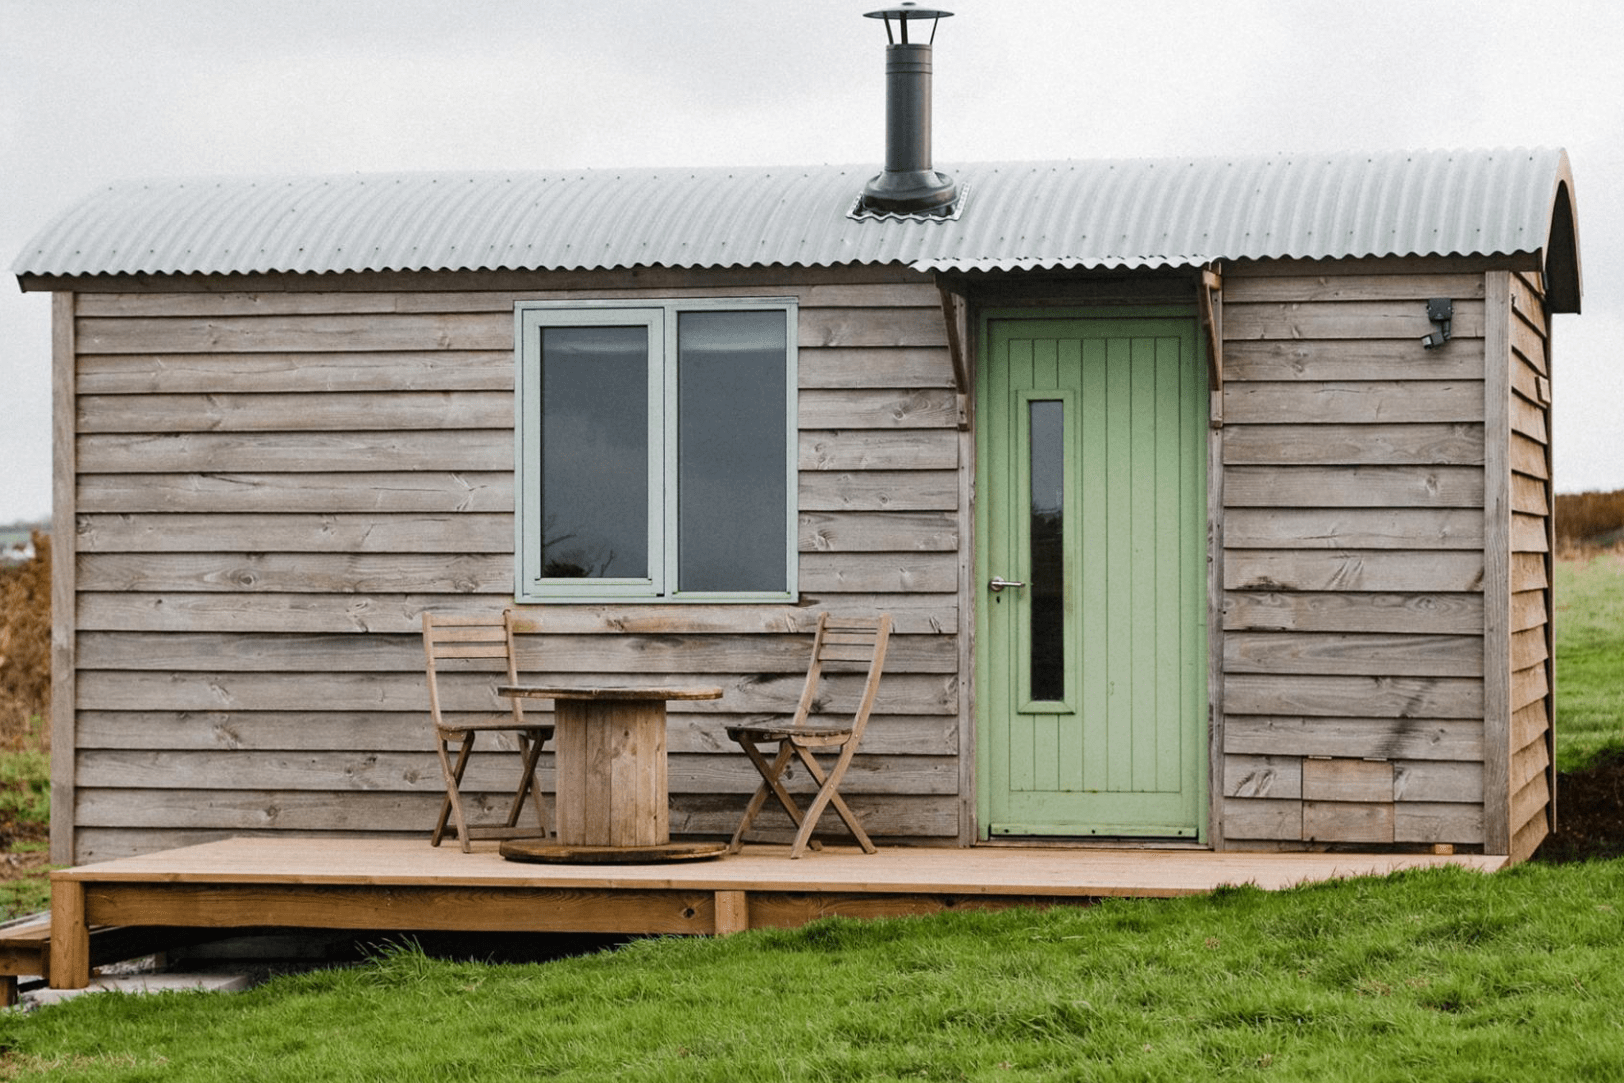 Mount Pleasant Ecological Park Campsite, Camping Pods and Shepherds Huts 